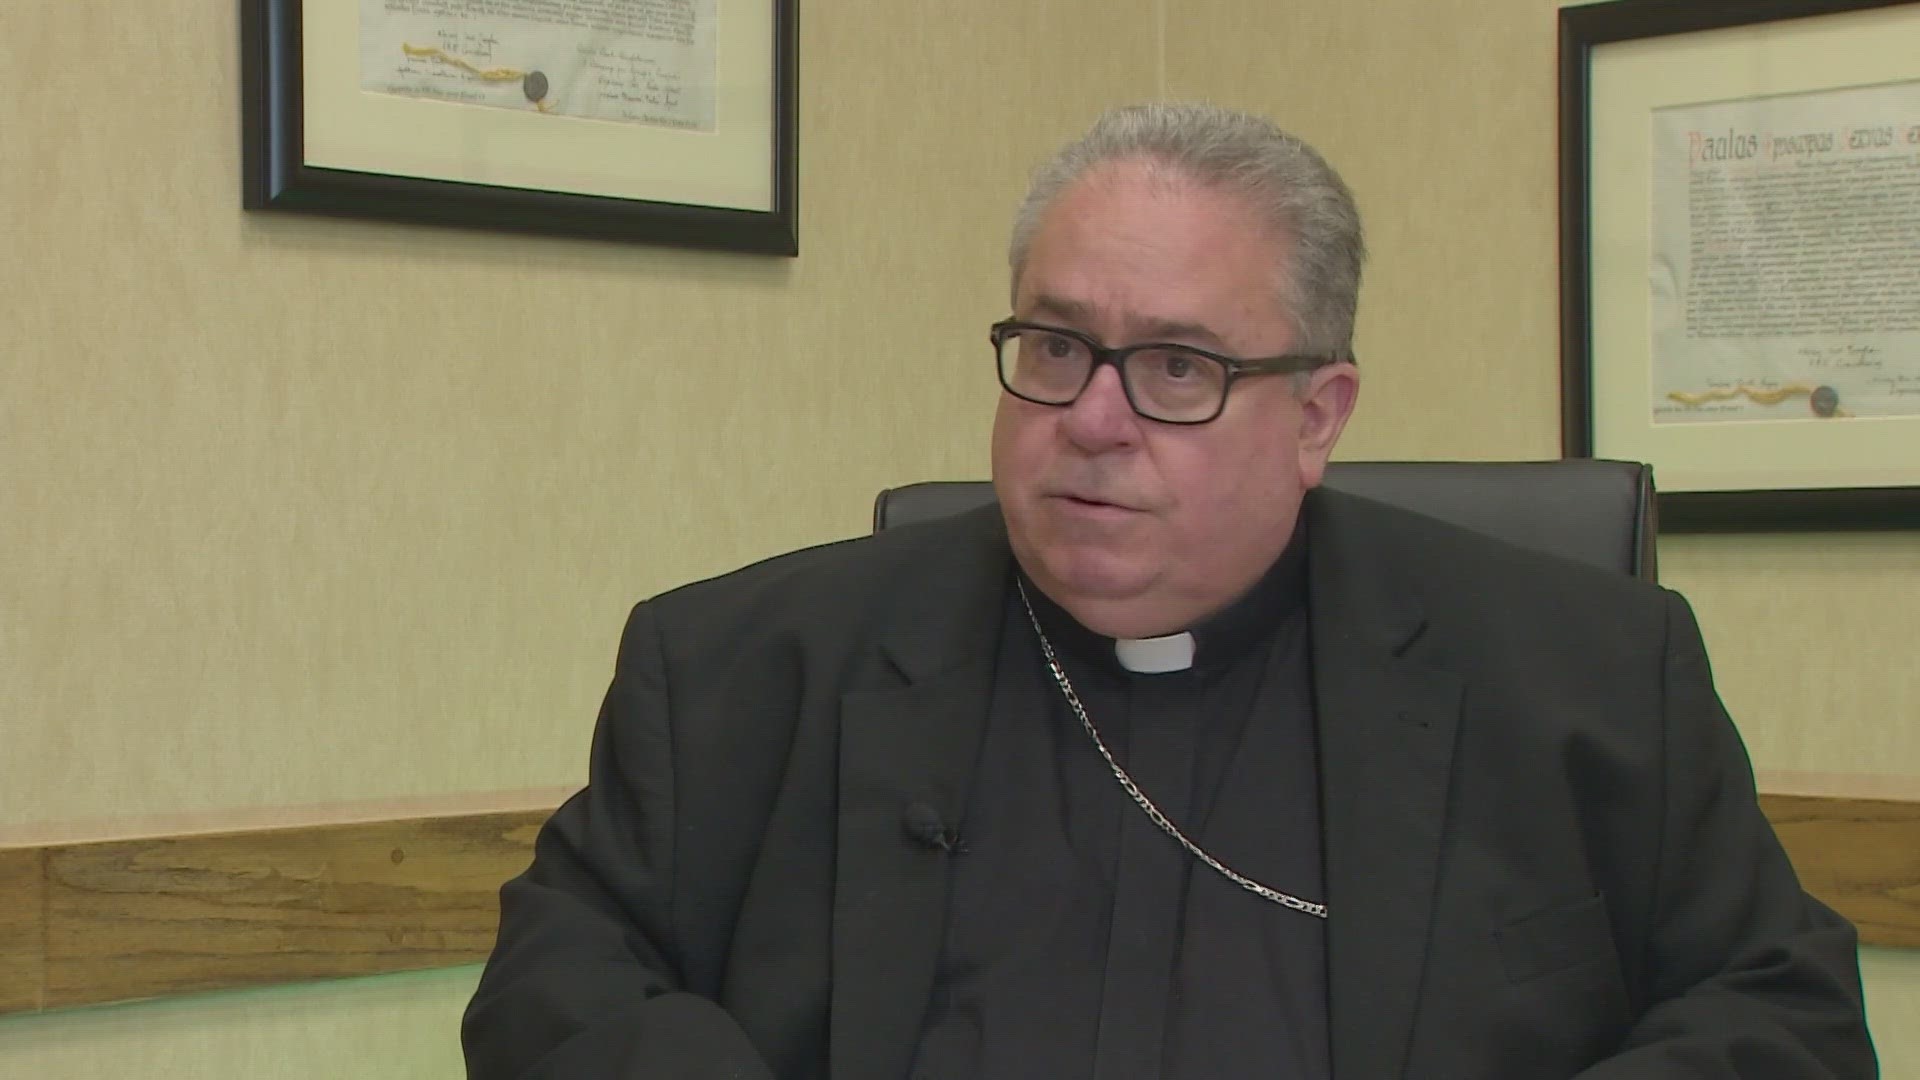 Pope Francis issued a statement Wednesday appointing Bishop Michael Olson as his representative in a scandal involving an Arlington monastery.